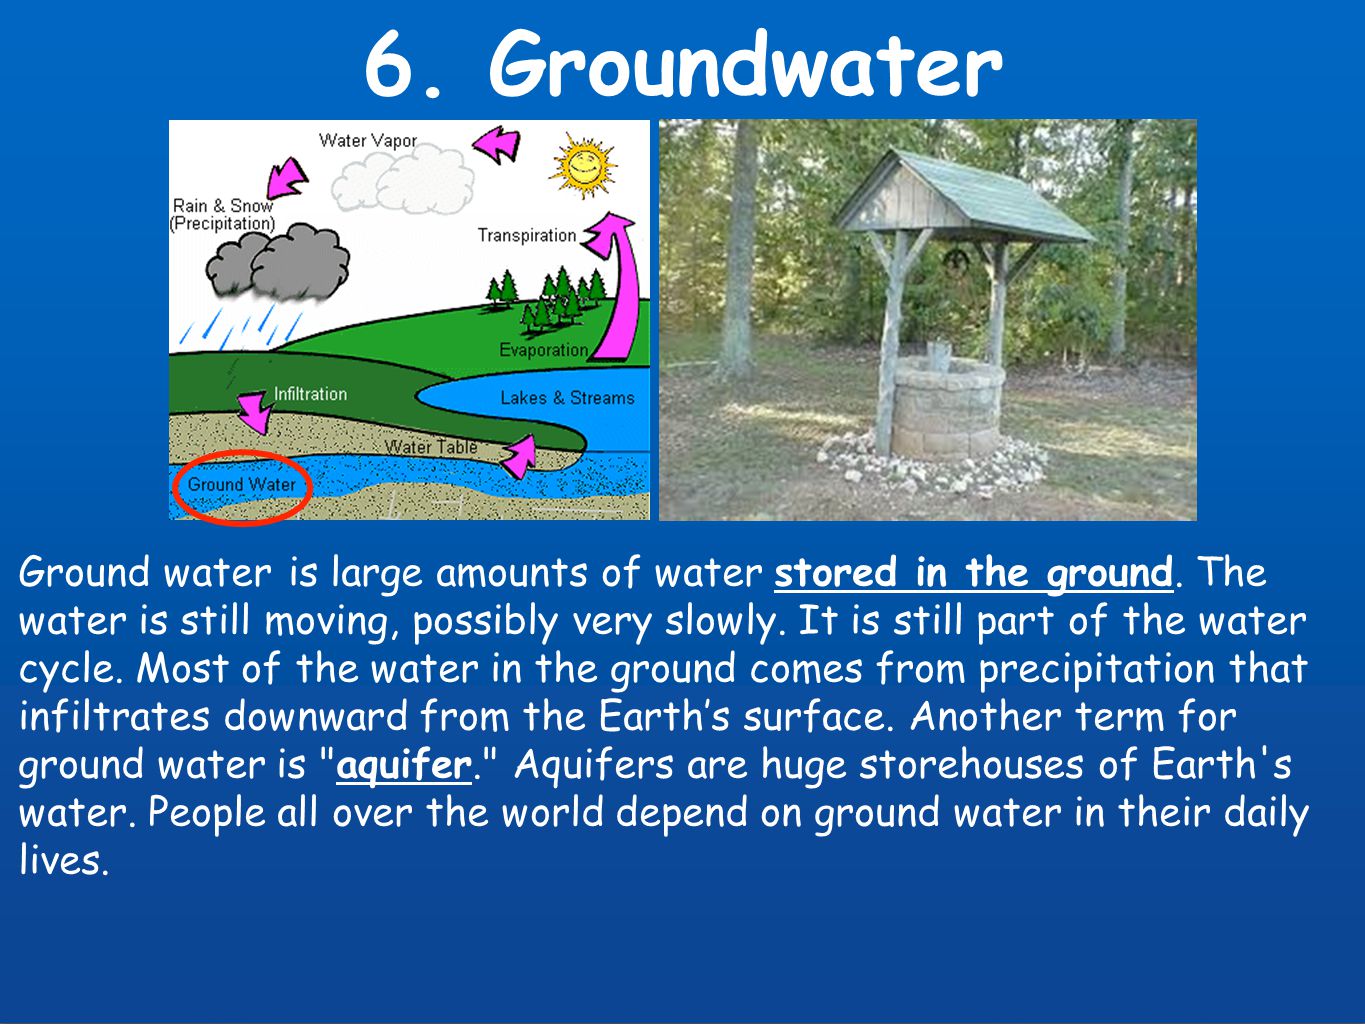 6. Groundwater